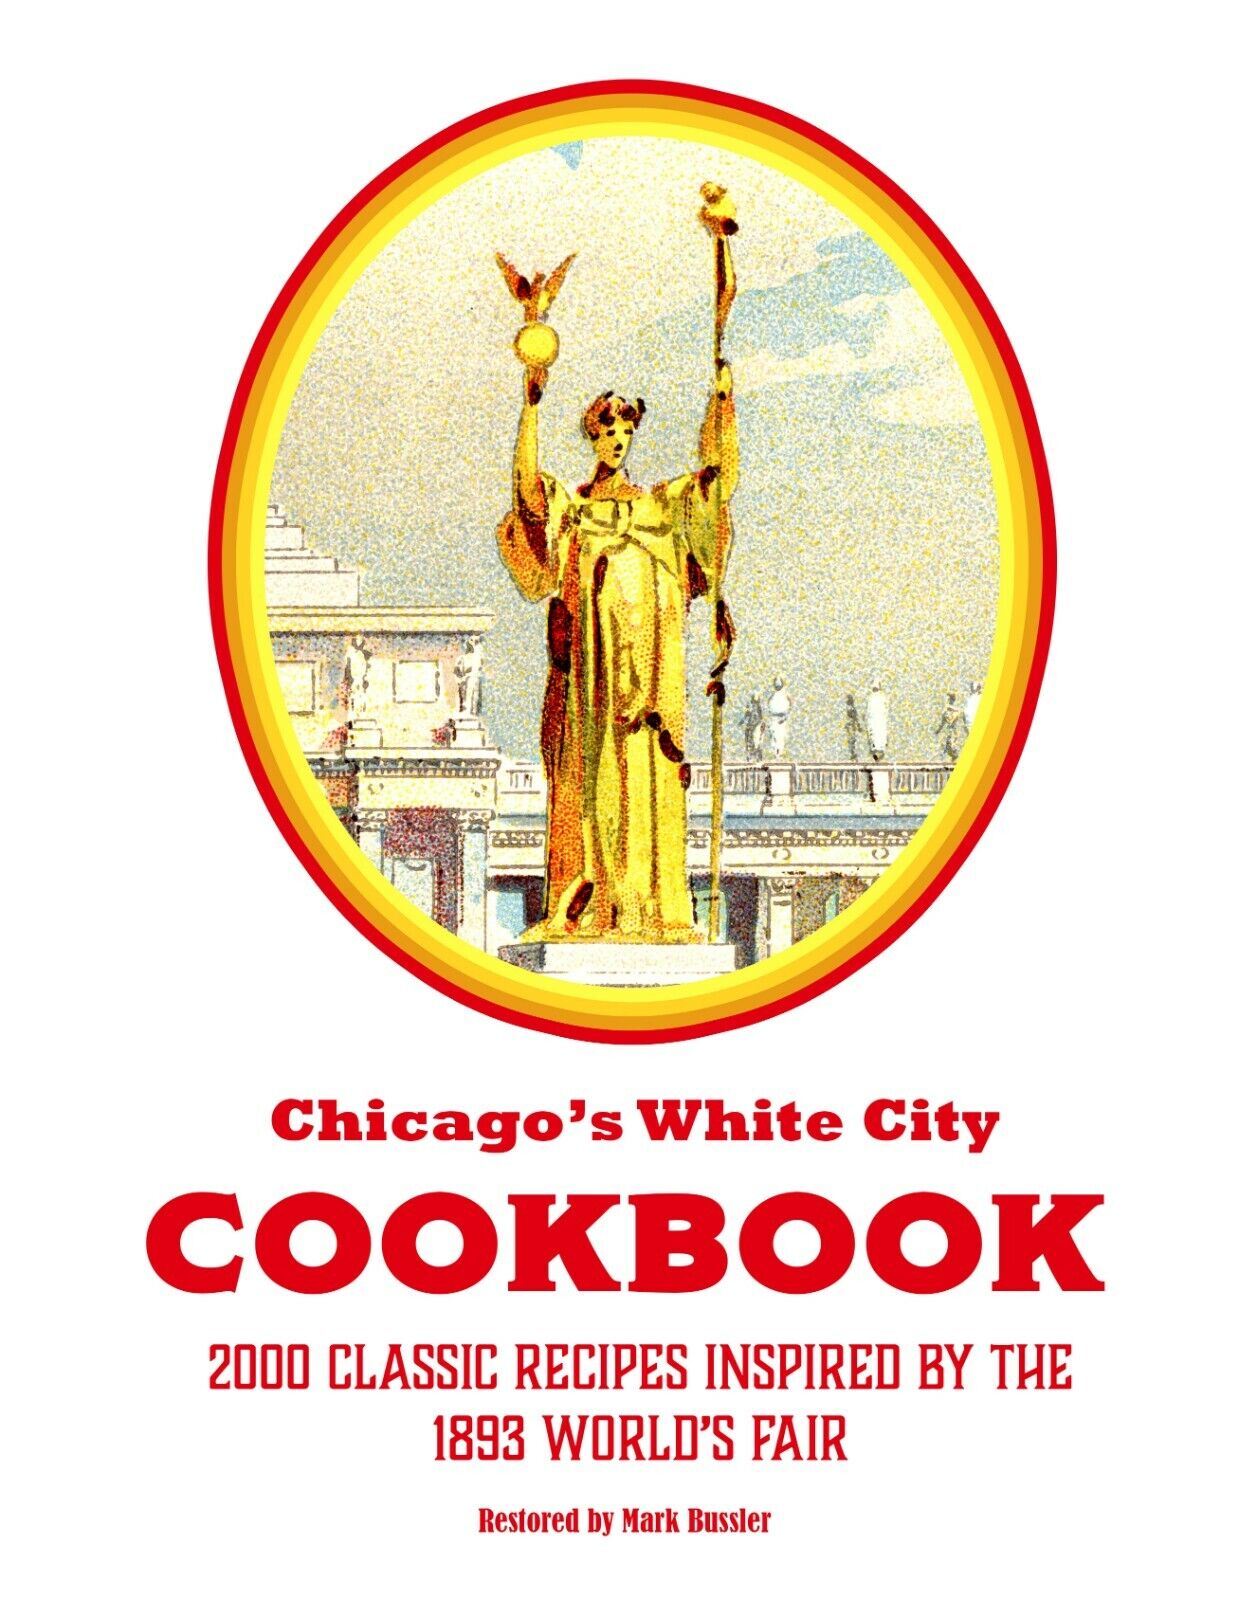 Chicago’s White City Cookbook 2000 Classic Recipes Inspired by 1893 World’s Fair